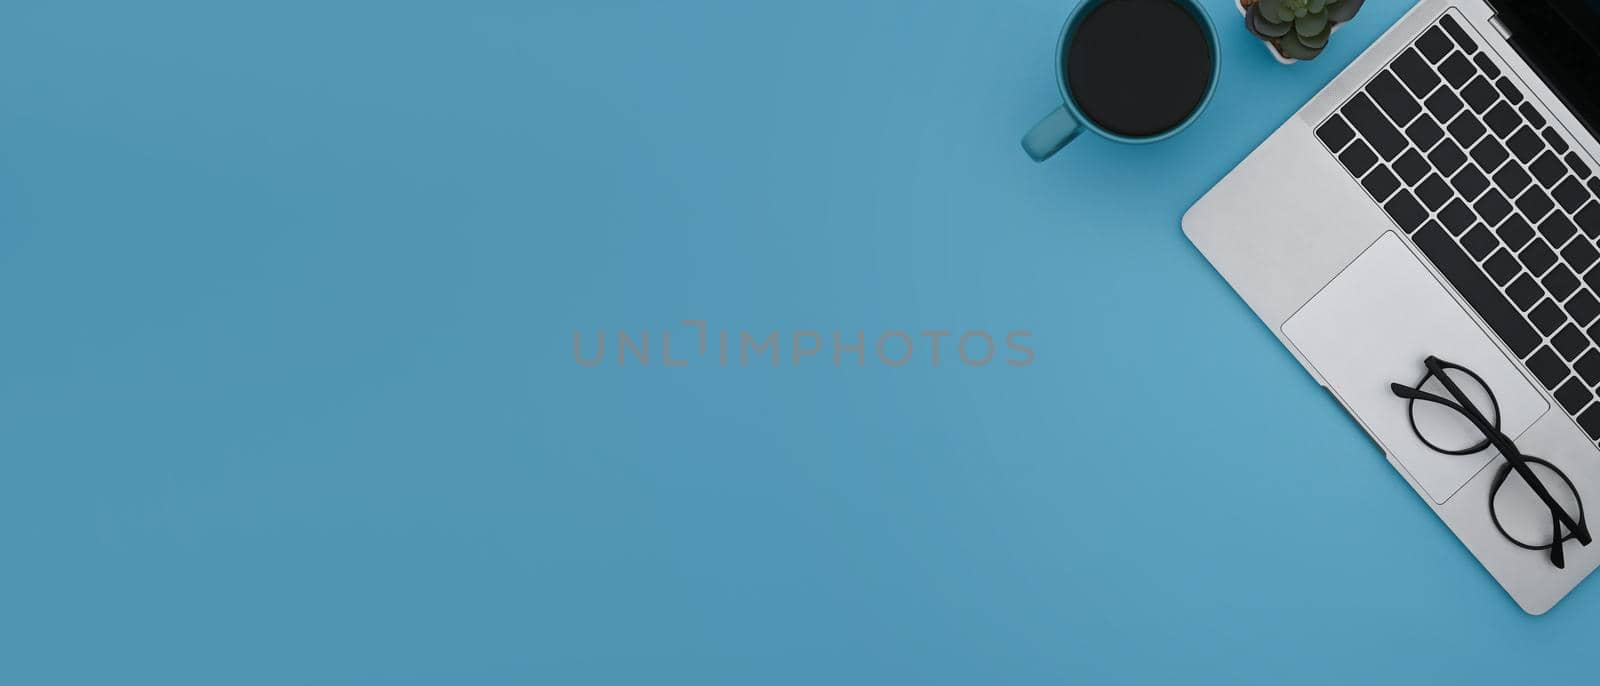 Top view laptop computer, coffee cup and glasses on blue background with copy pace. by prathanchorruangsak